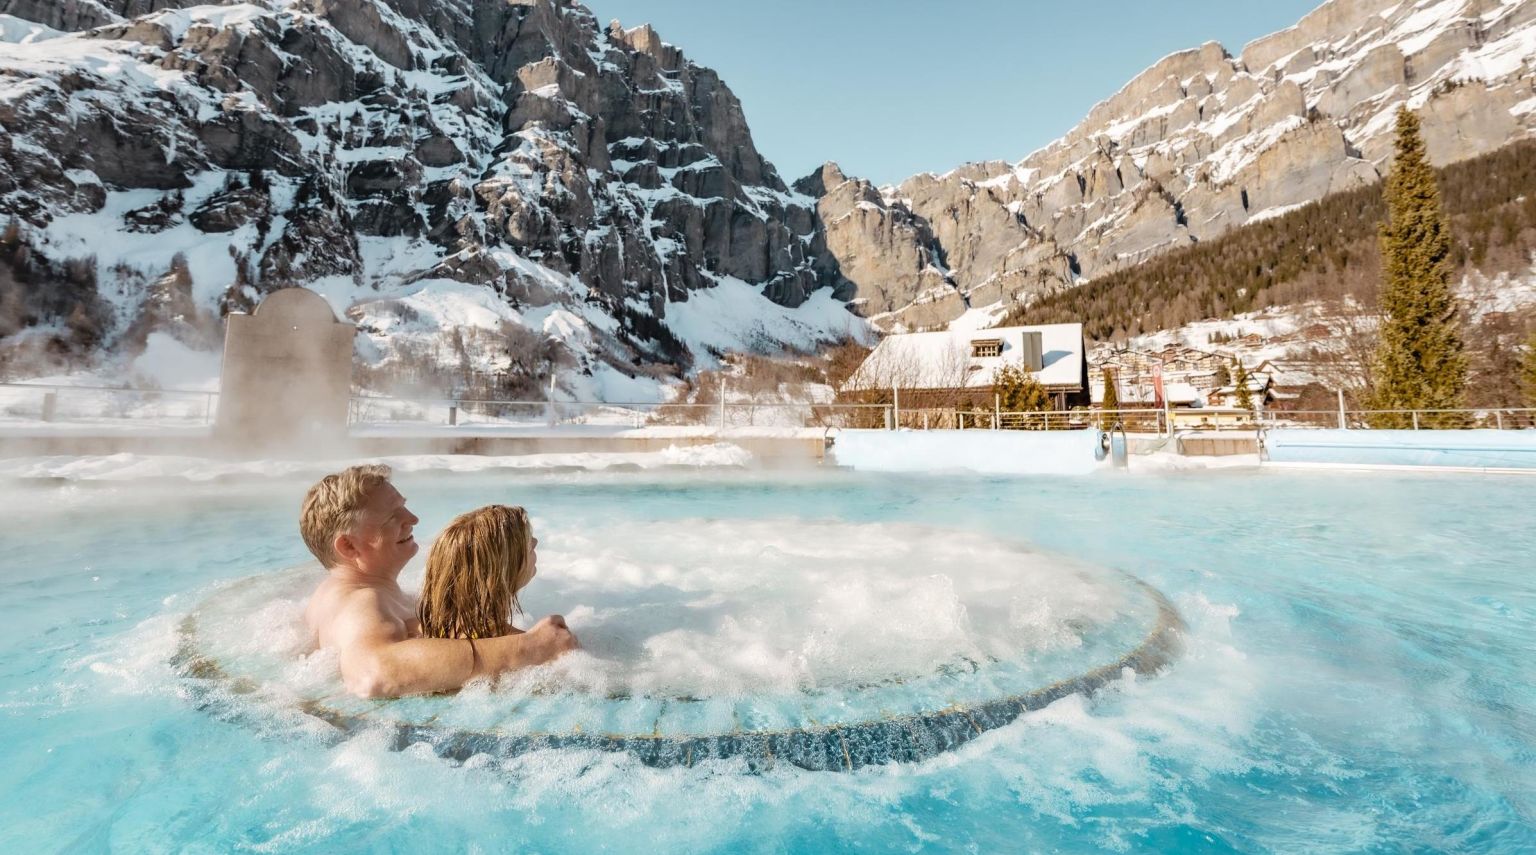 Two people admiring the view from the thermal baths of Leukerbad. Valais, Switzerland